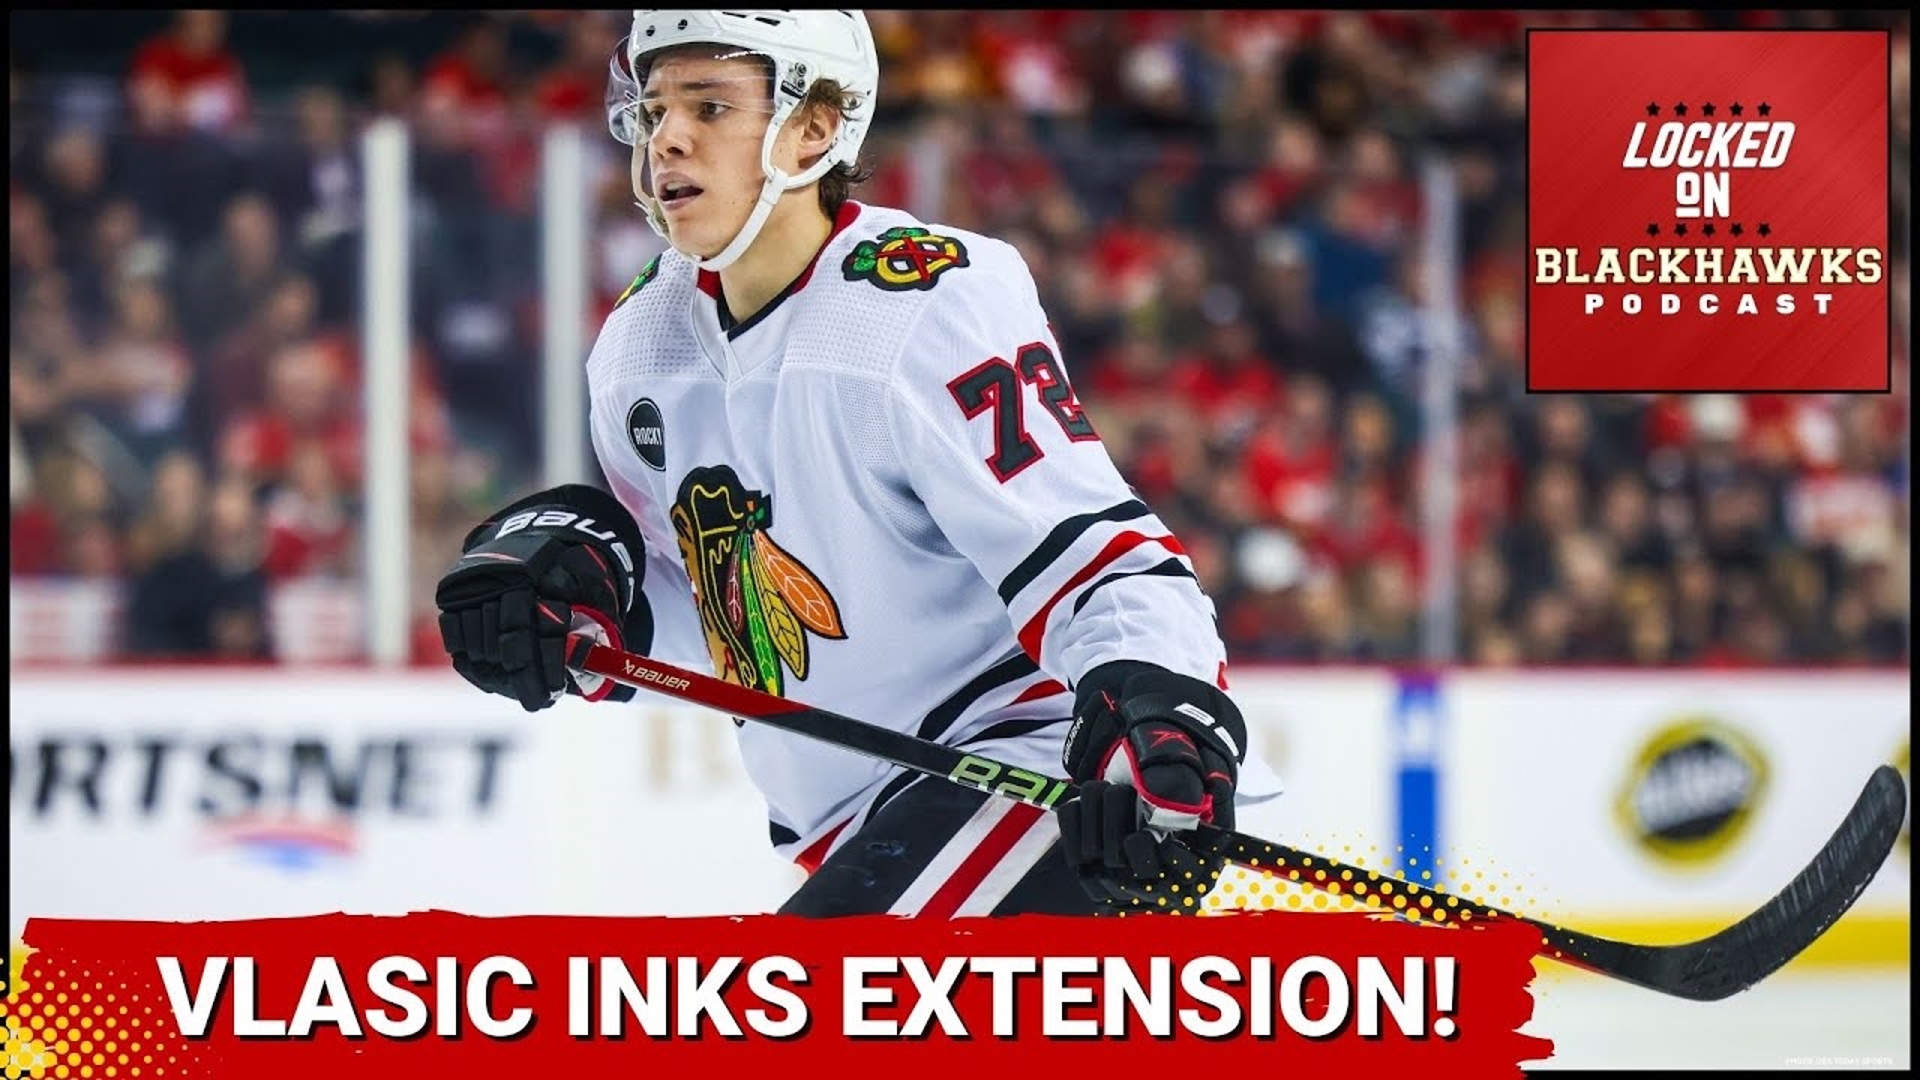 Thursday's episode begins with a breakdown of the Chicago Blackhawks signing 22-year-old defenseman Alex Vlasic to a six-year contract extension.